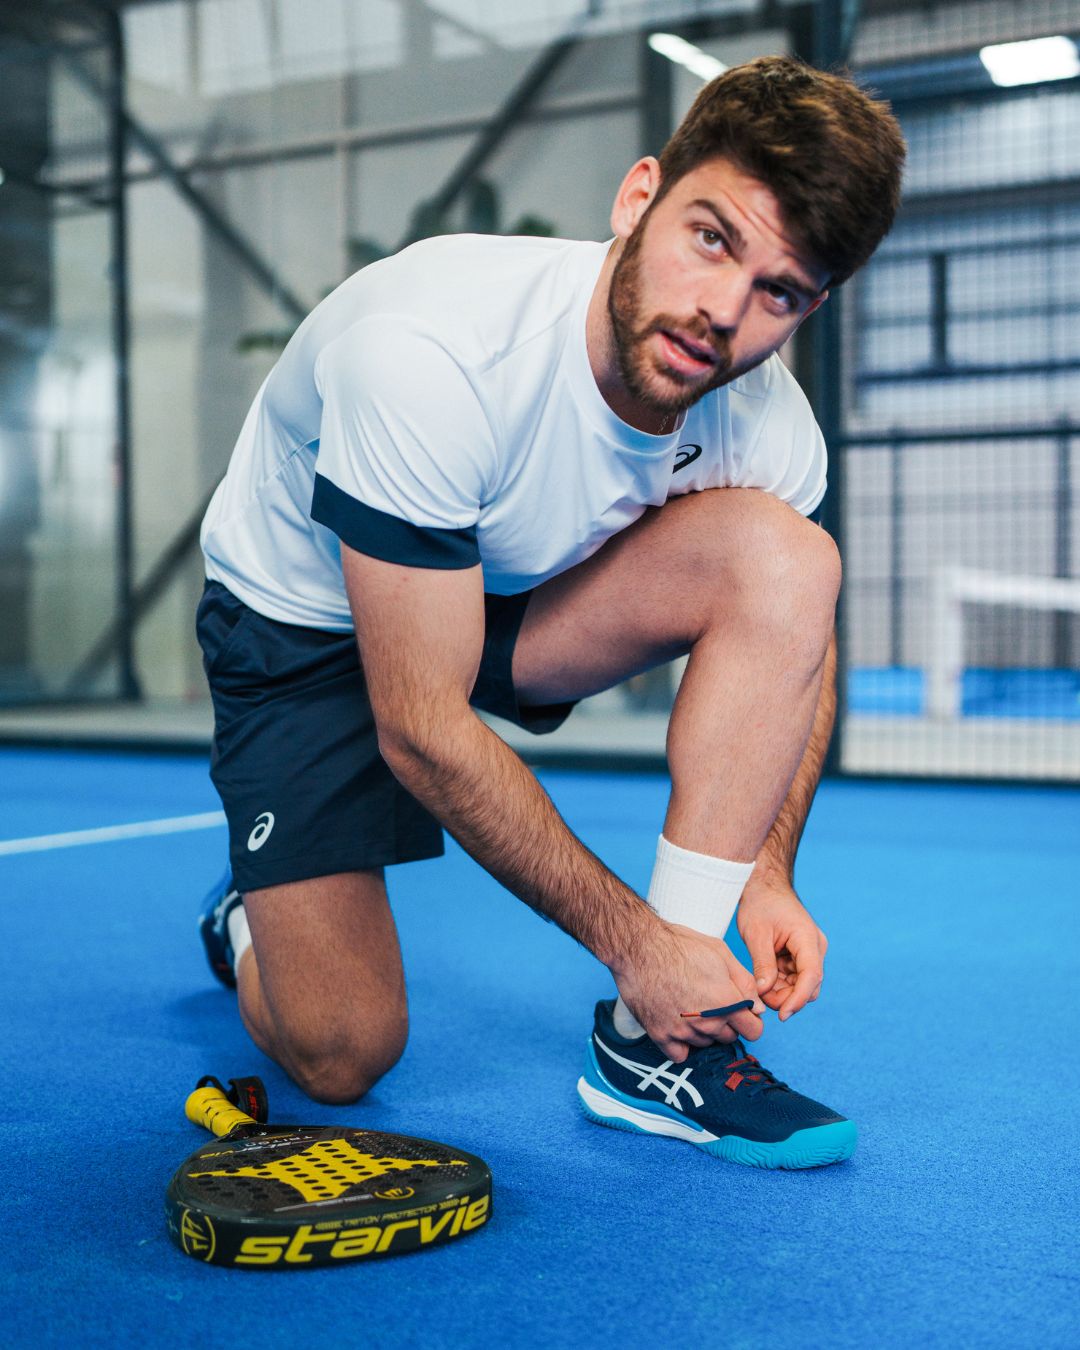 Thus, a short time ago they announced their alliance with the Spanish firm StarVie, so those players with rackets of this brand will also wear ASICS products